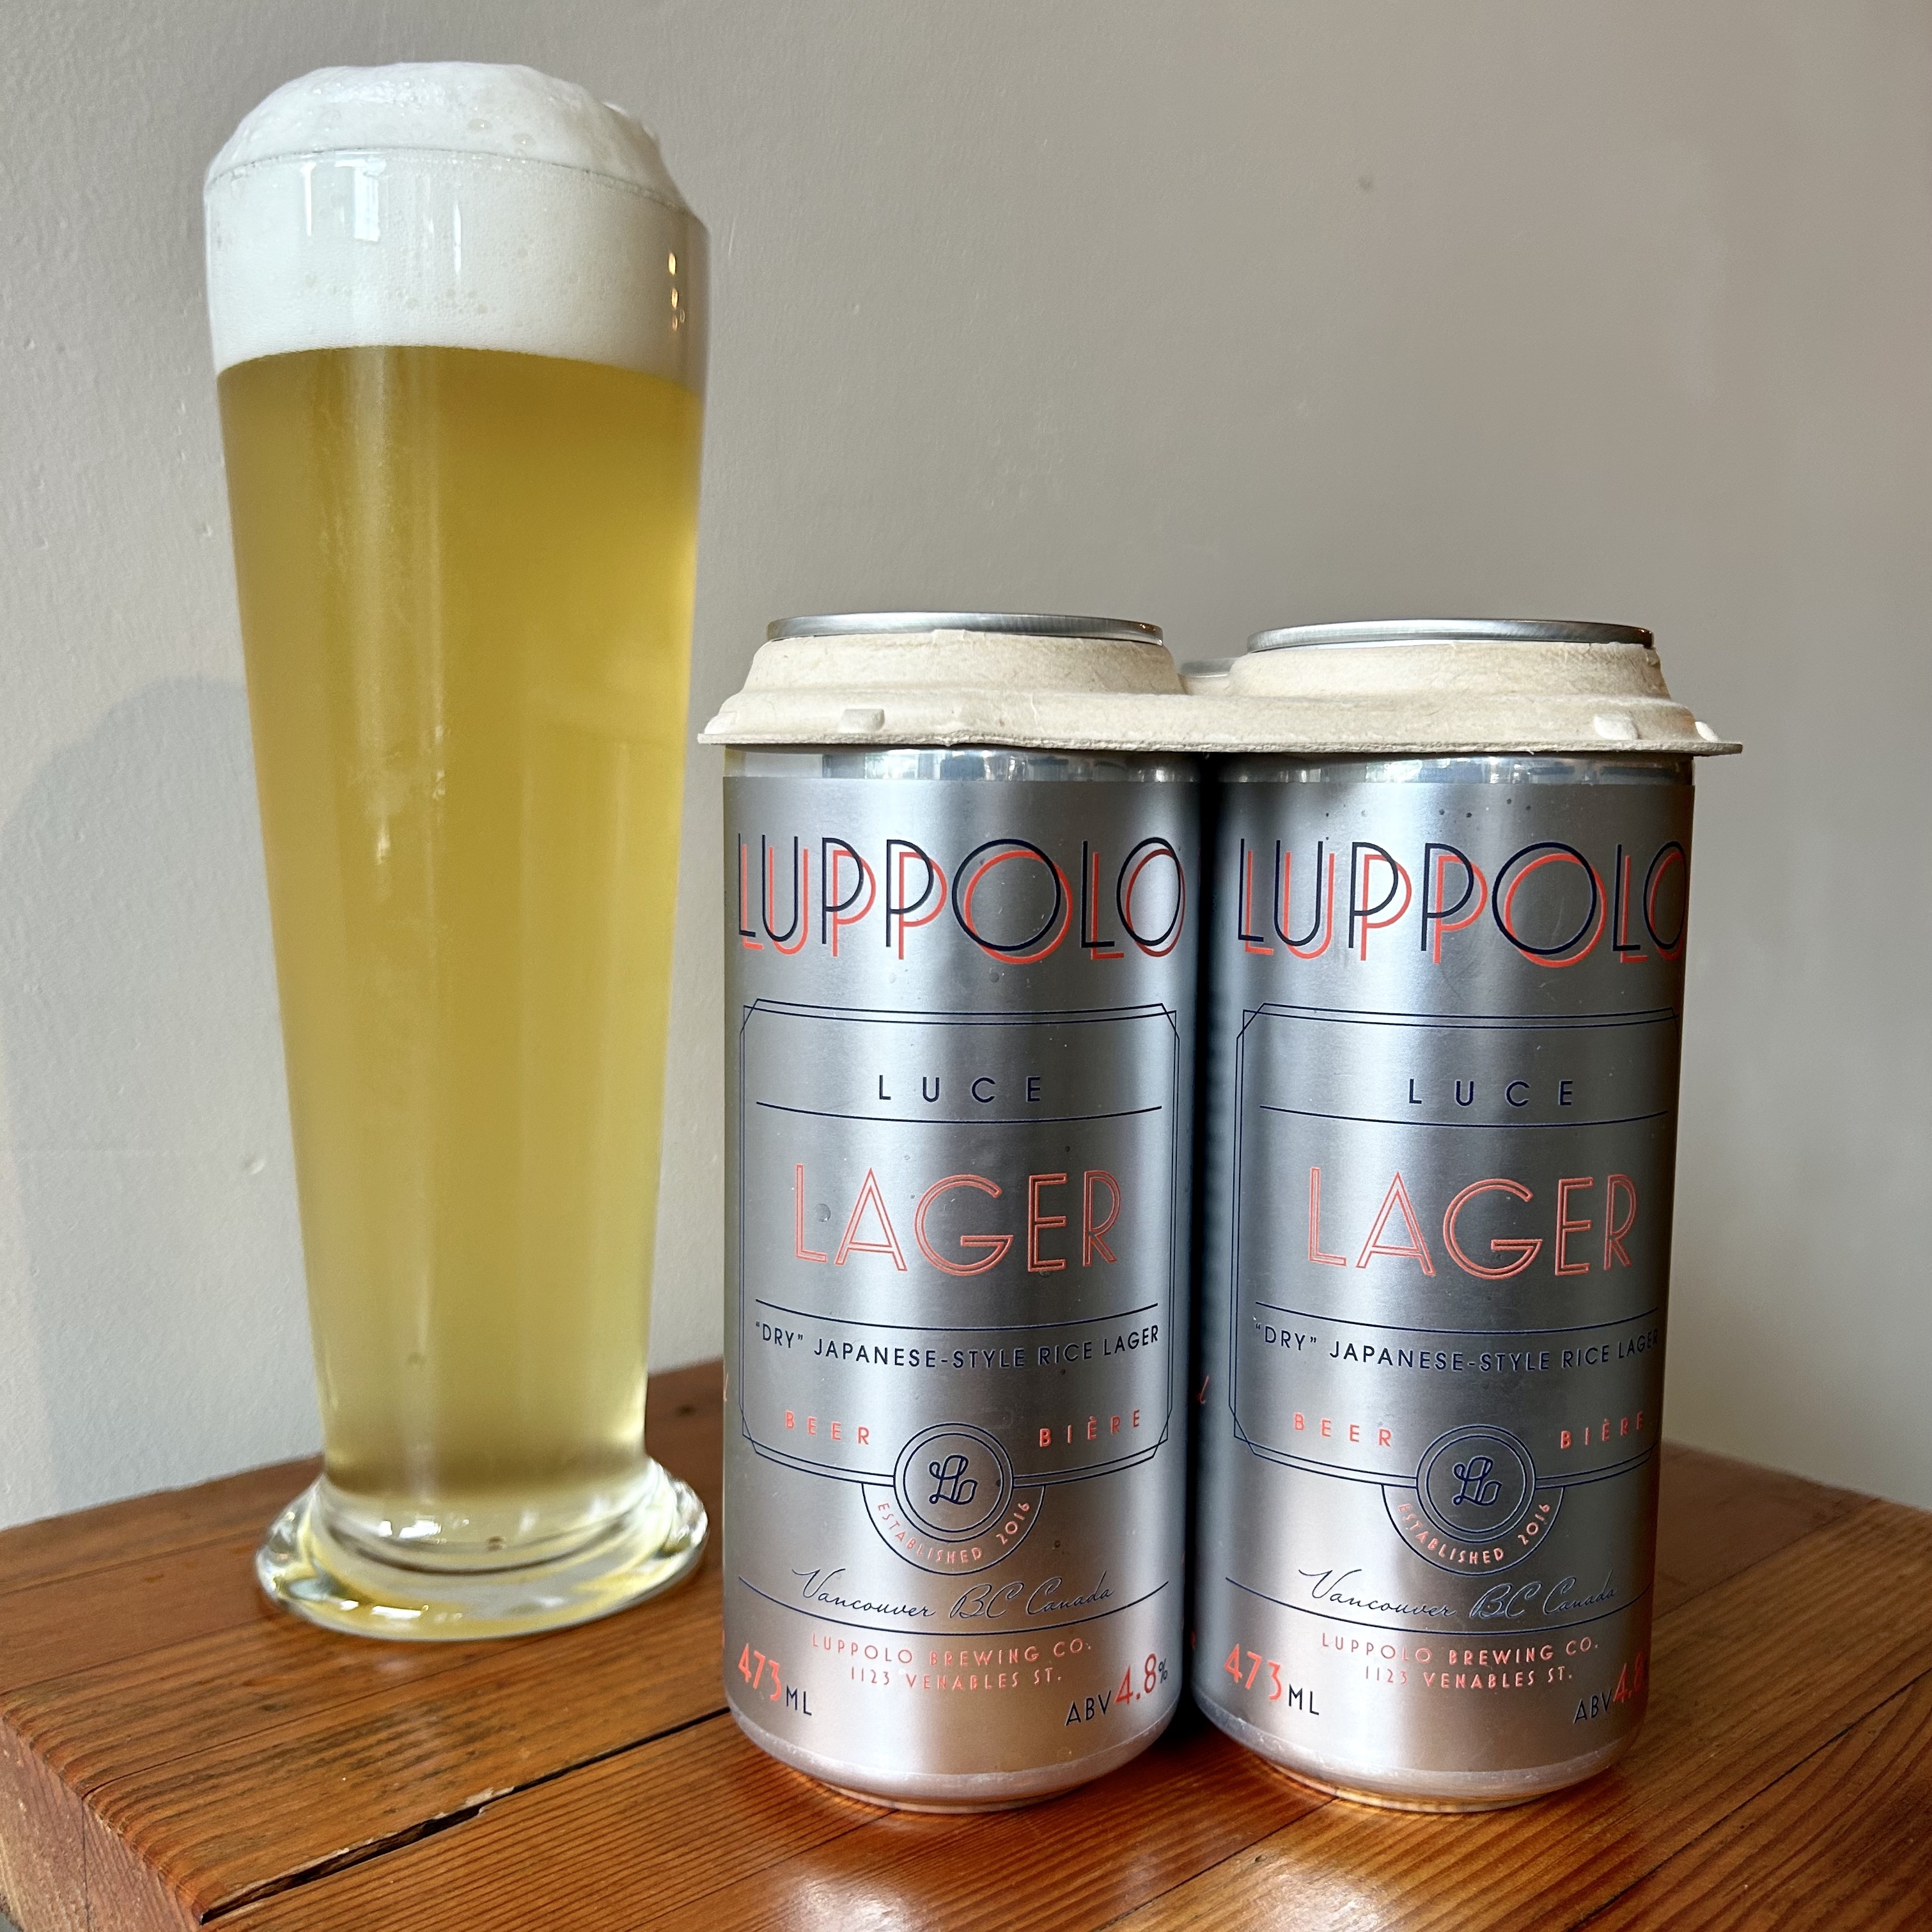 Luce Dry Japanese Style Rice Lager